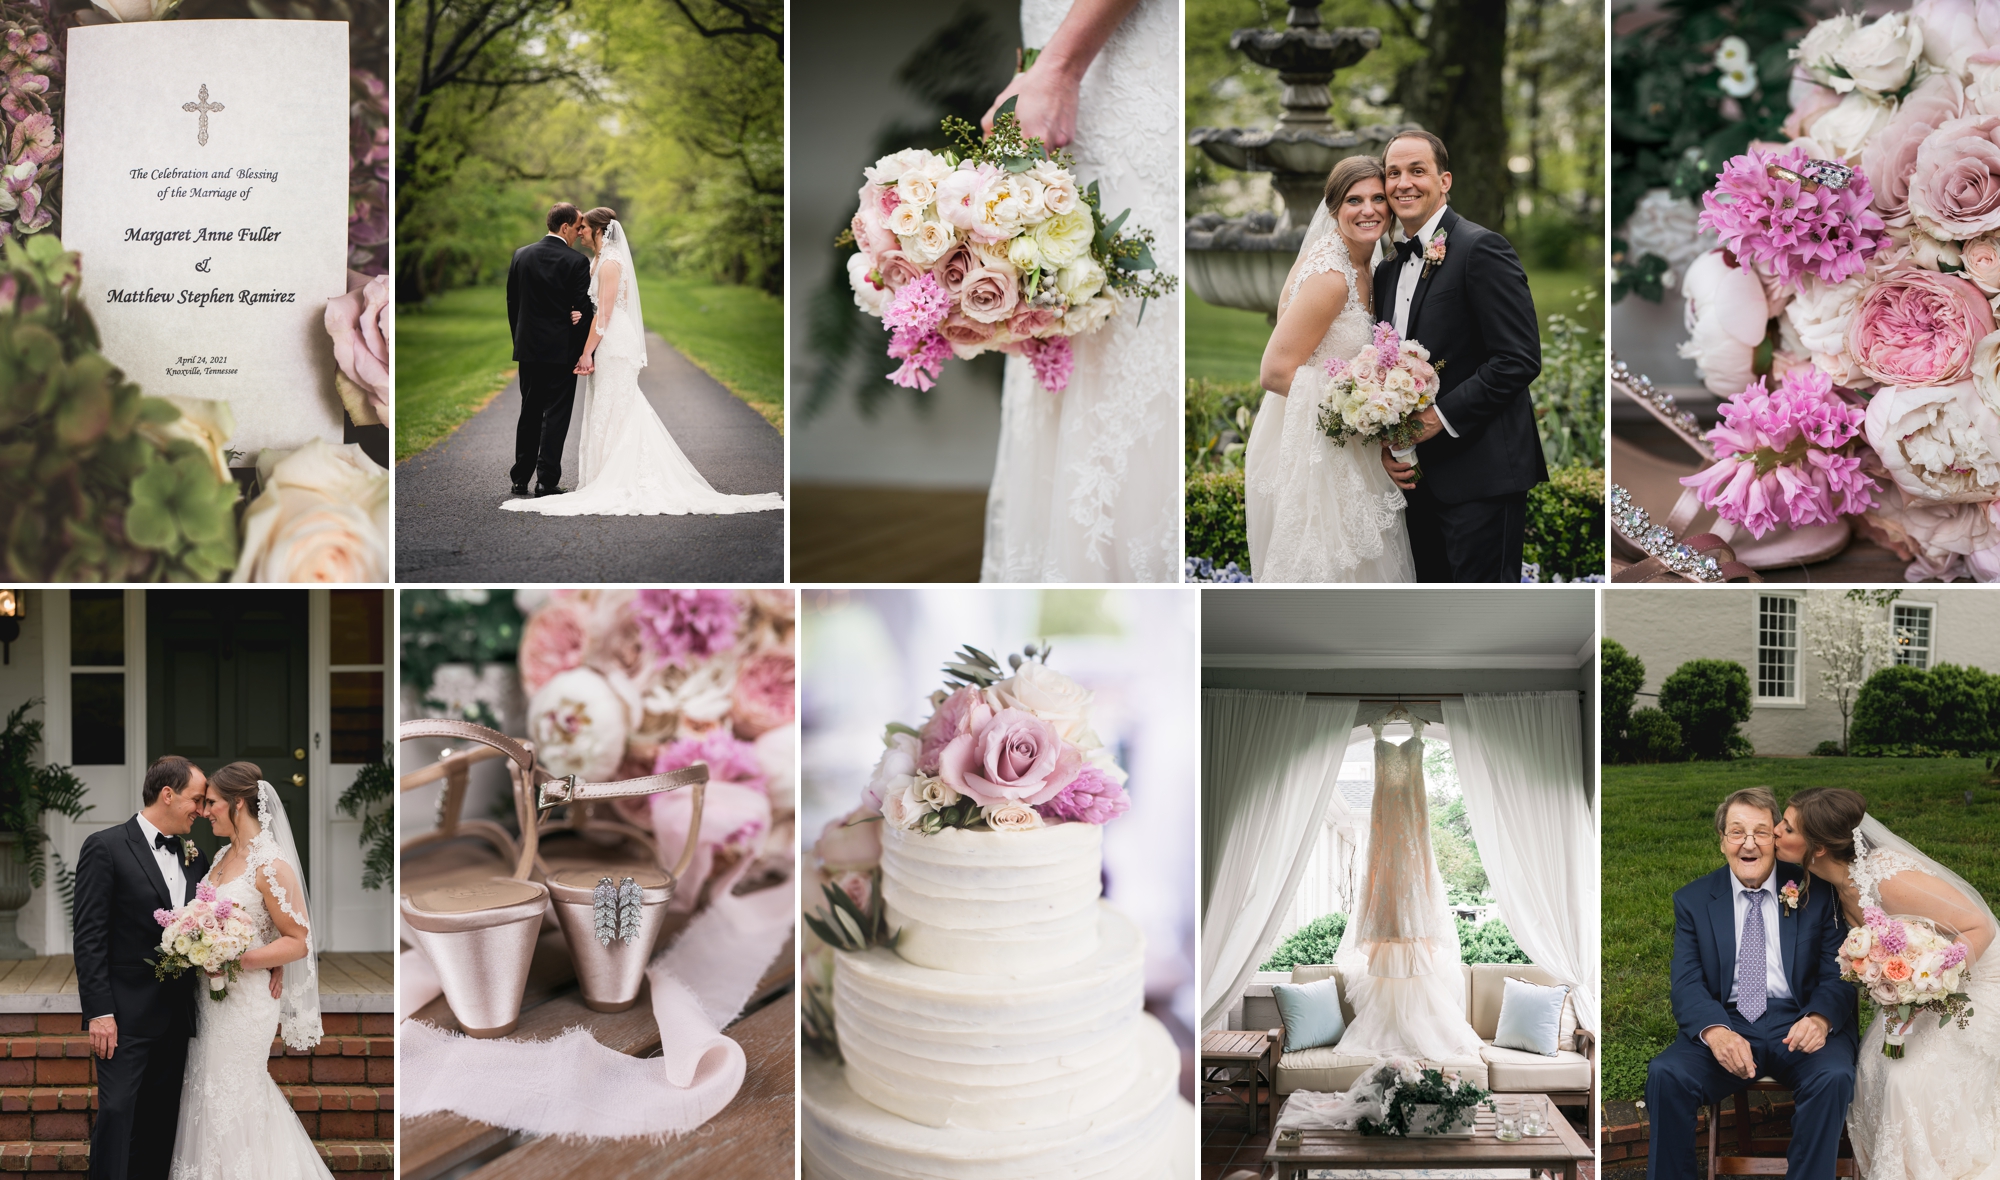 Classic formal wedding at Maple Grove Estate in Knoxville, TN